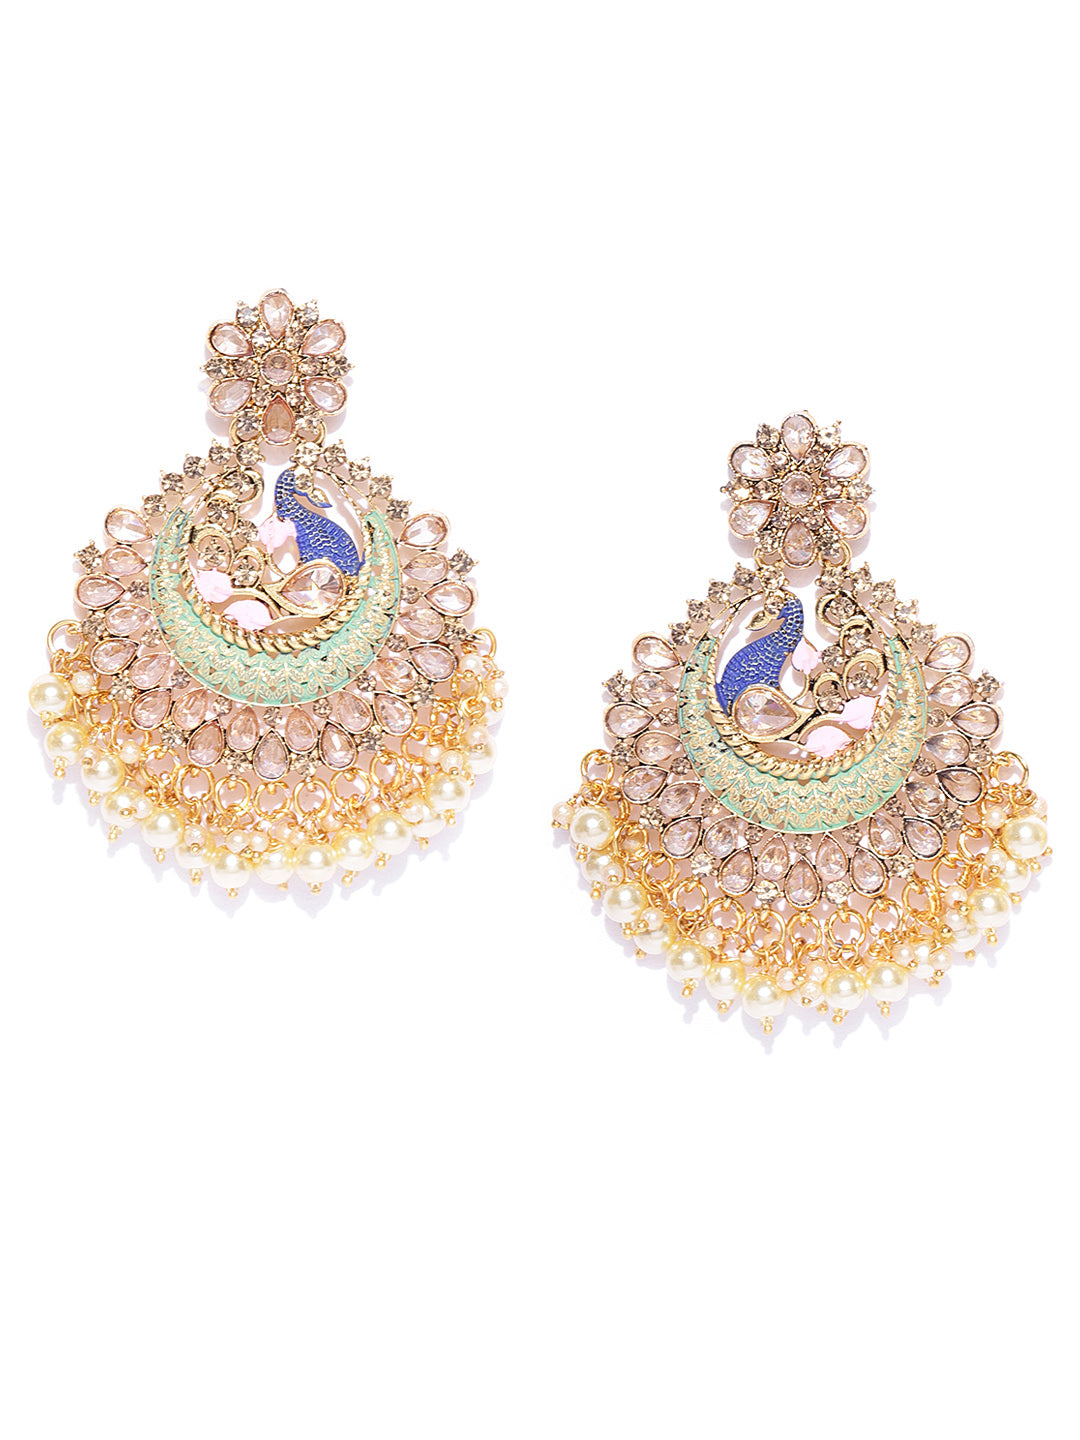 Indian Gold plated Gorgeous Women Kerala Bridal Party Wear Dome Jhumka  Earrings | eBay